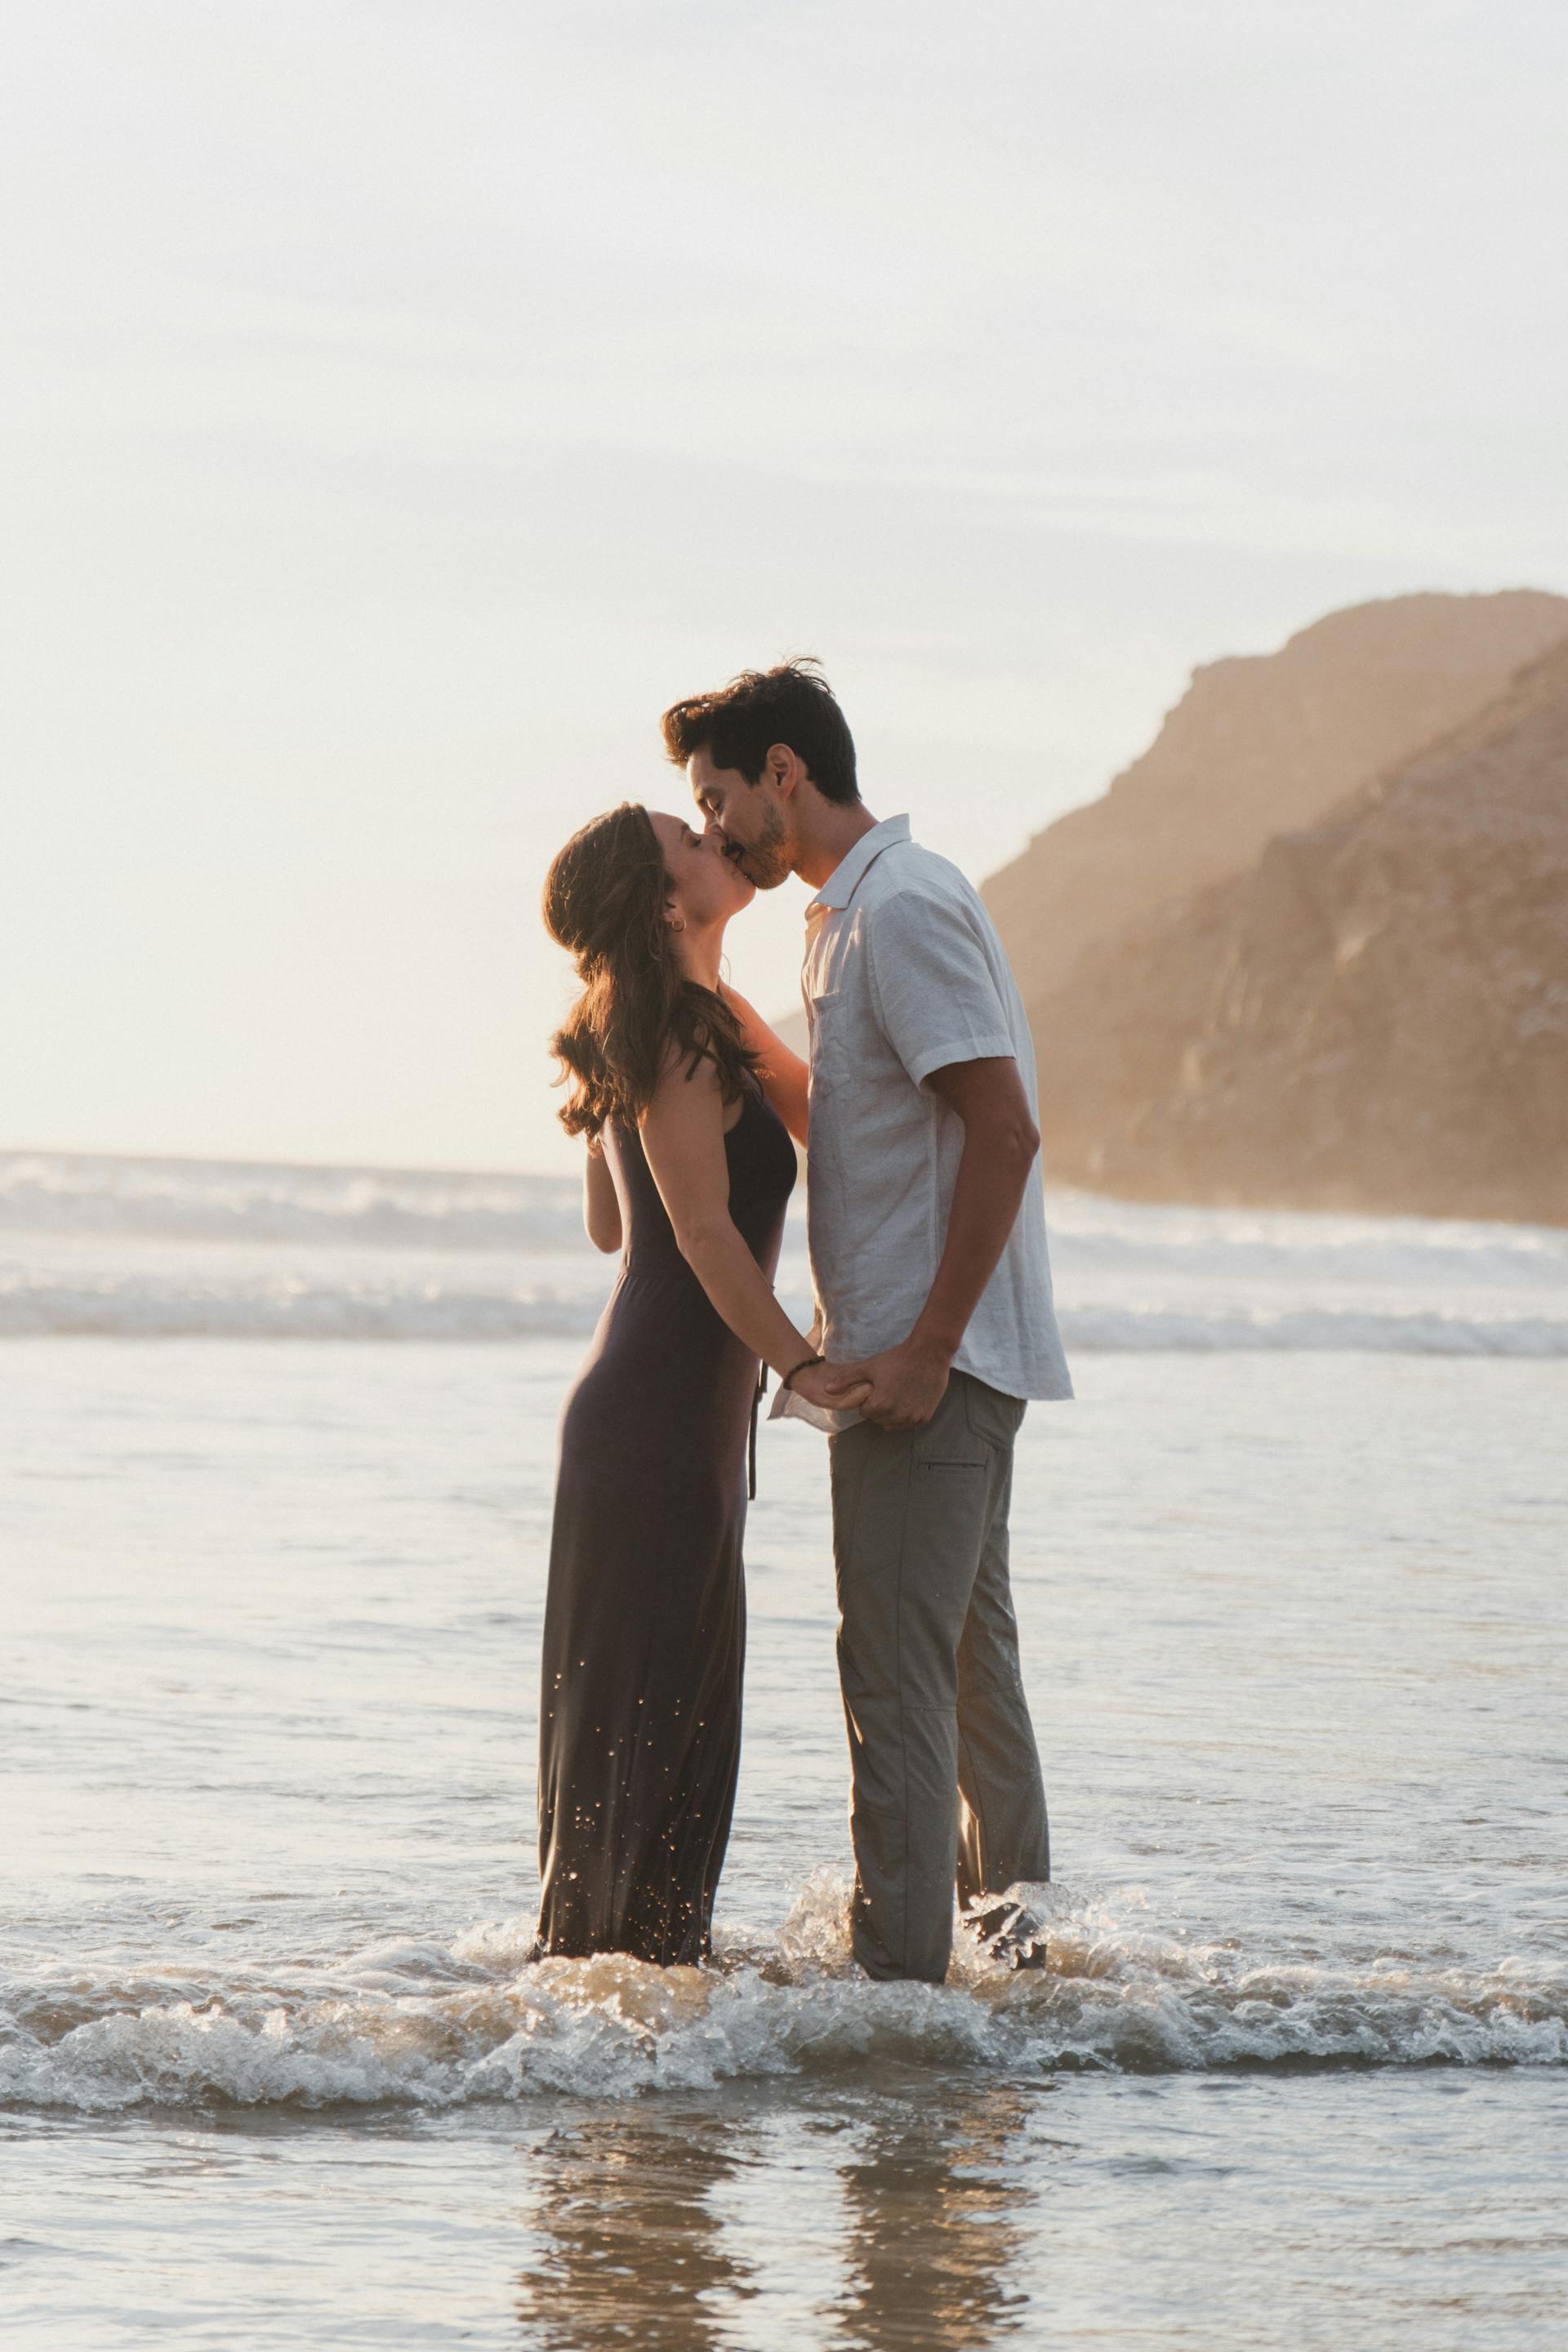 A couple kissing while standing ankles deep in the sea | Source: Pexels